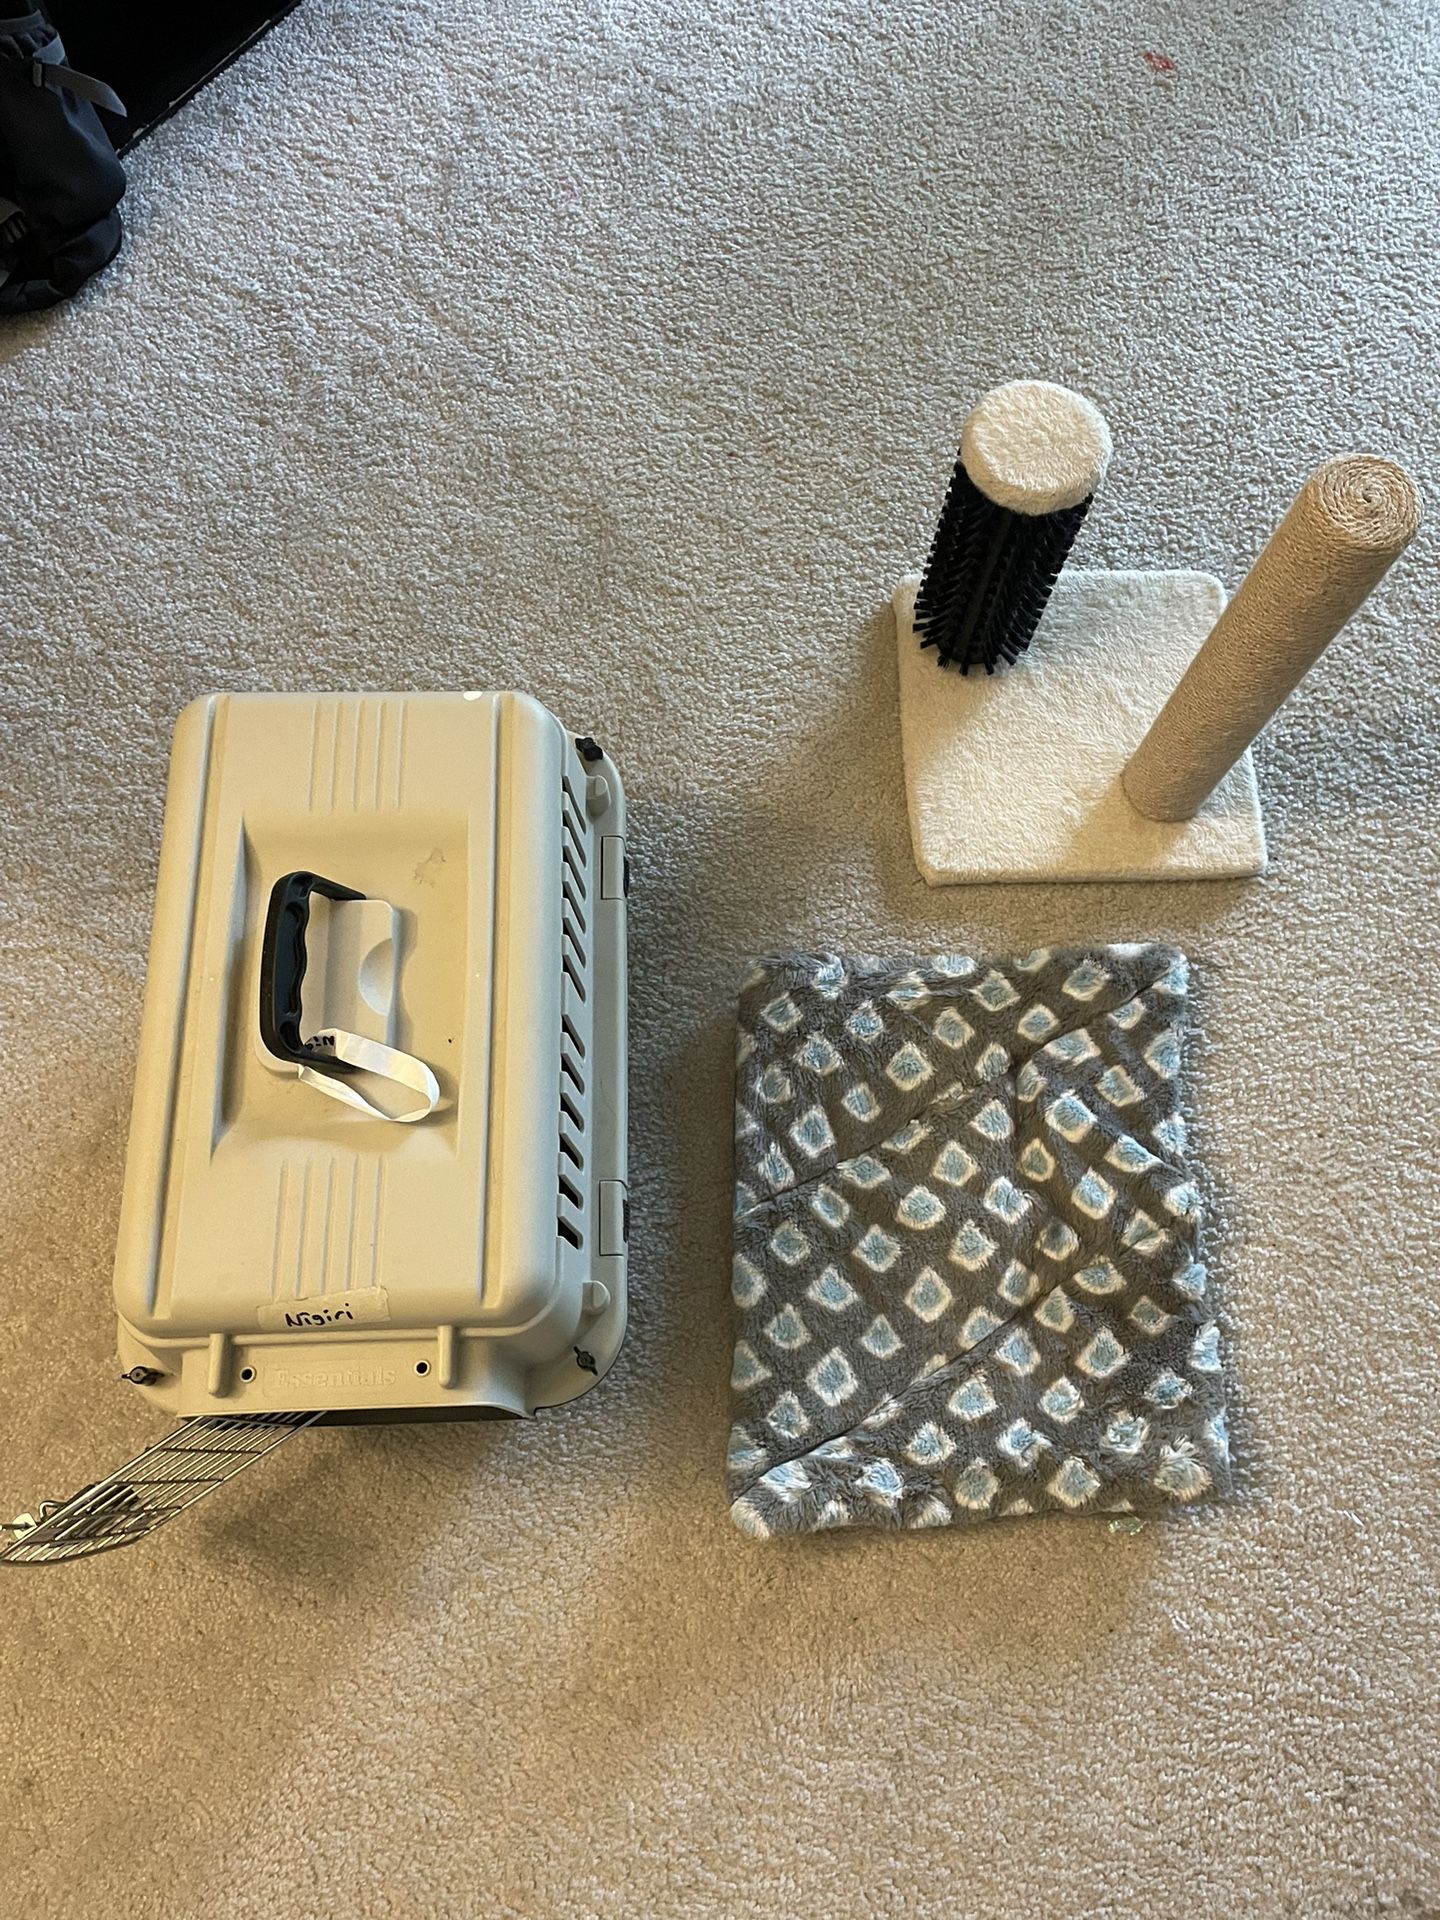 Cat kennel, bedding, and scratching post $30